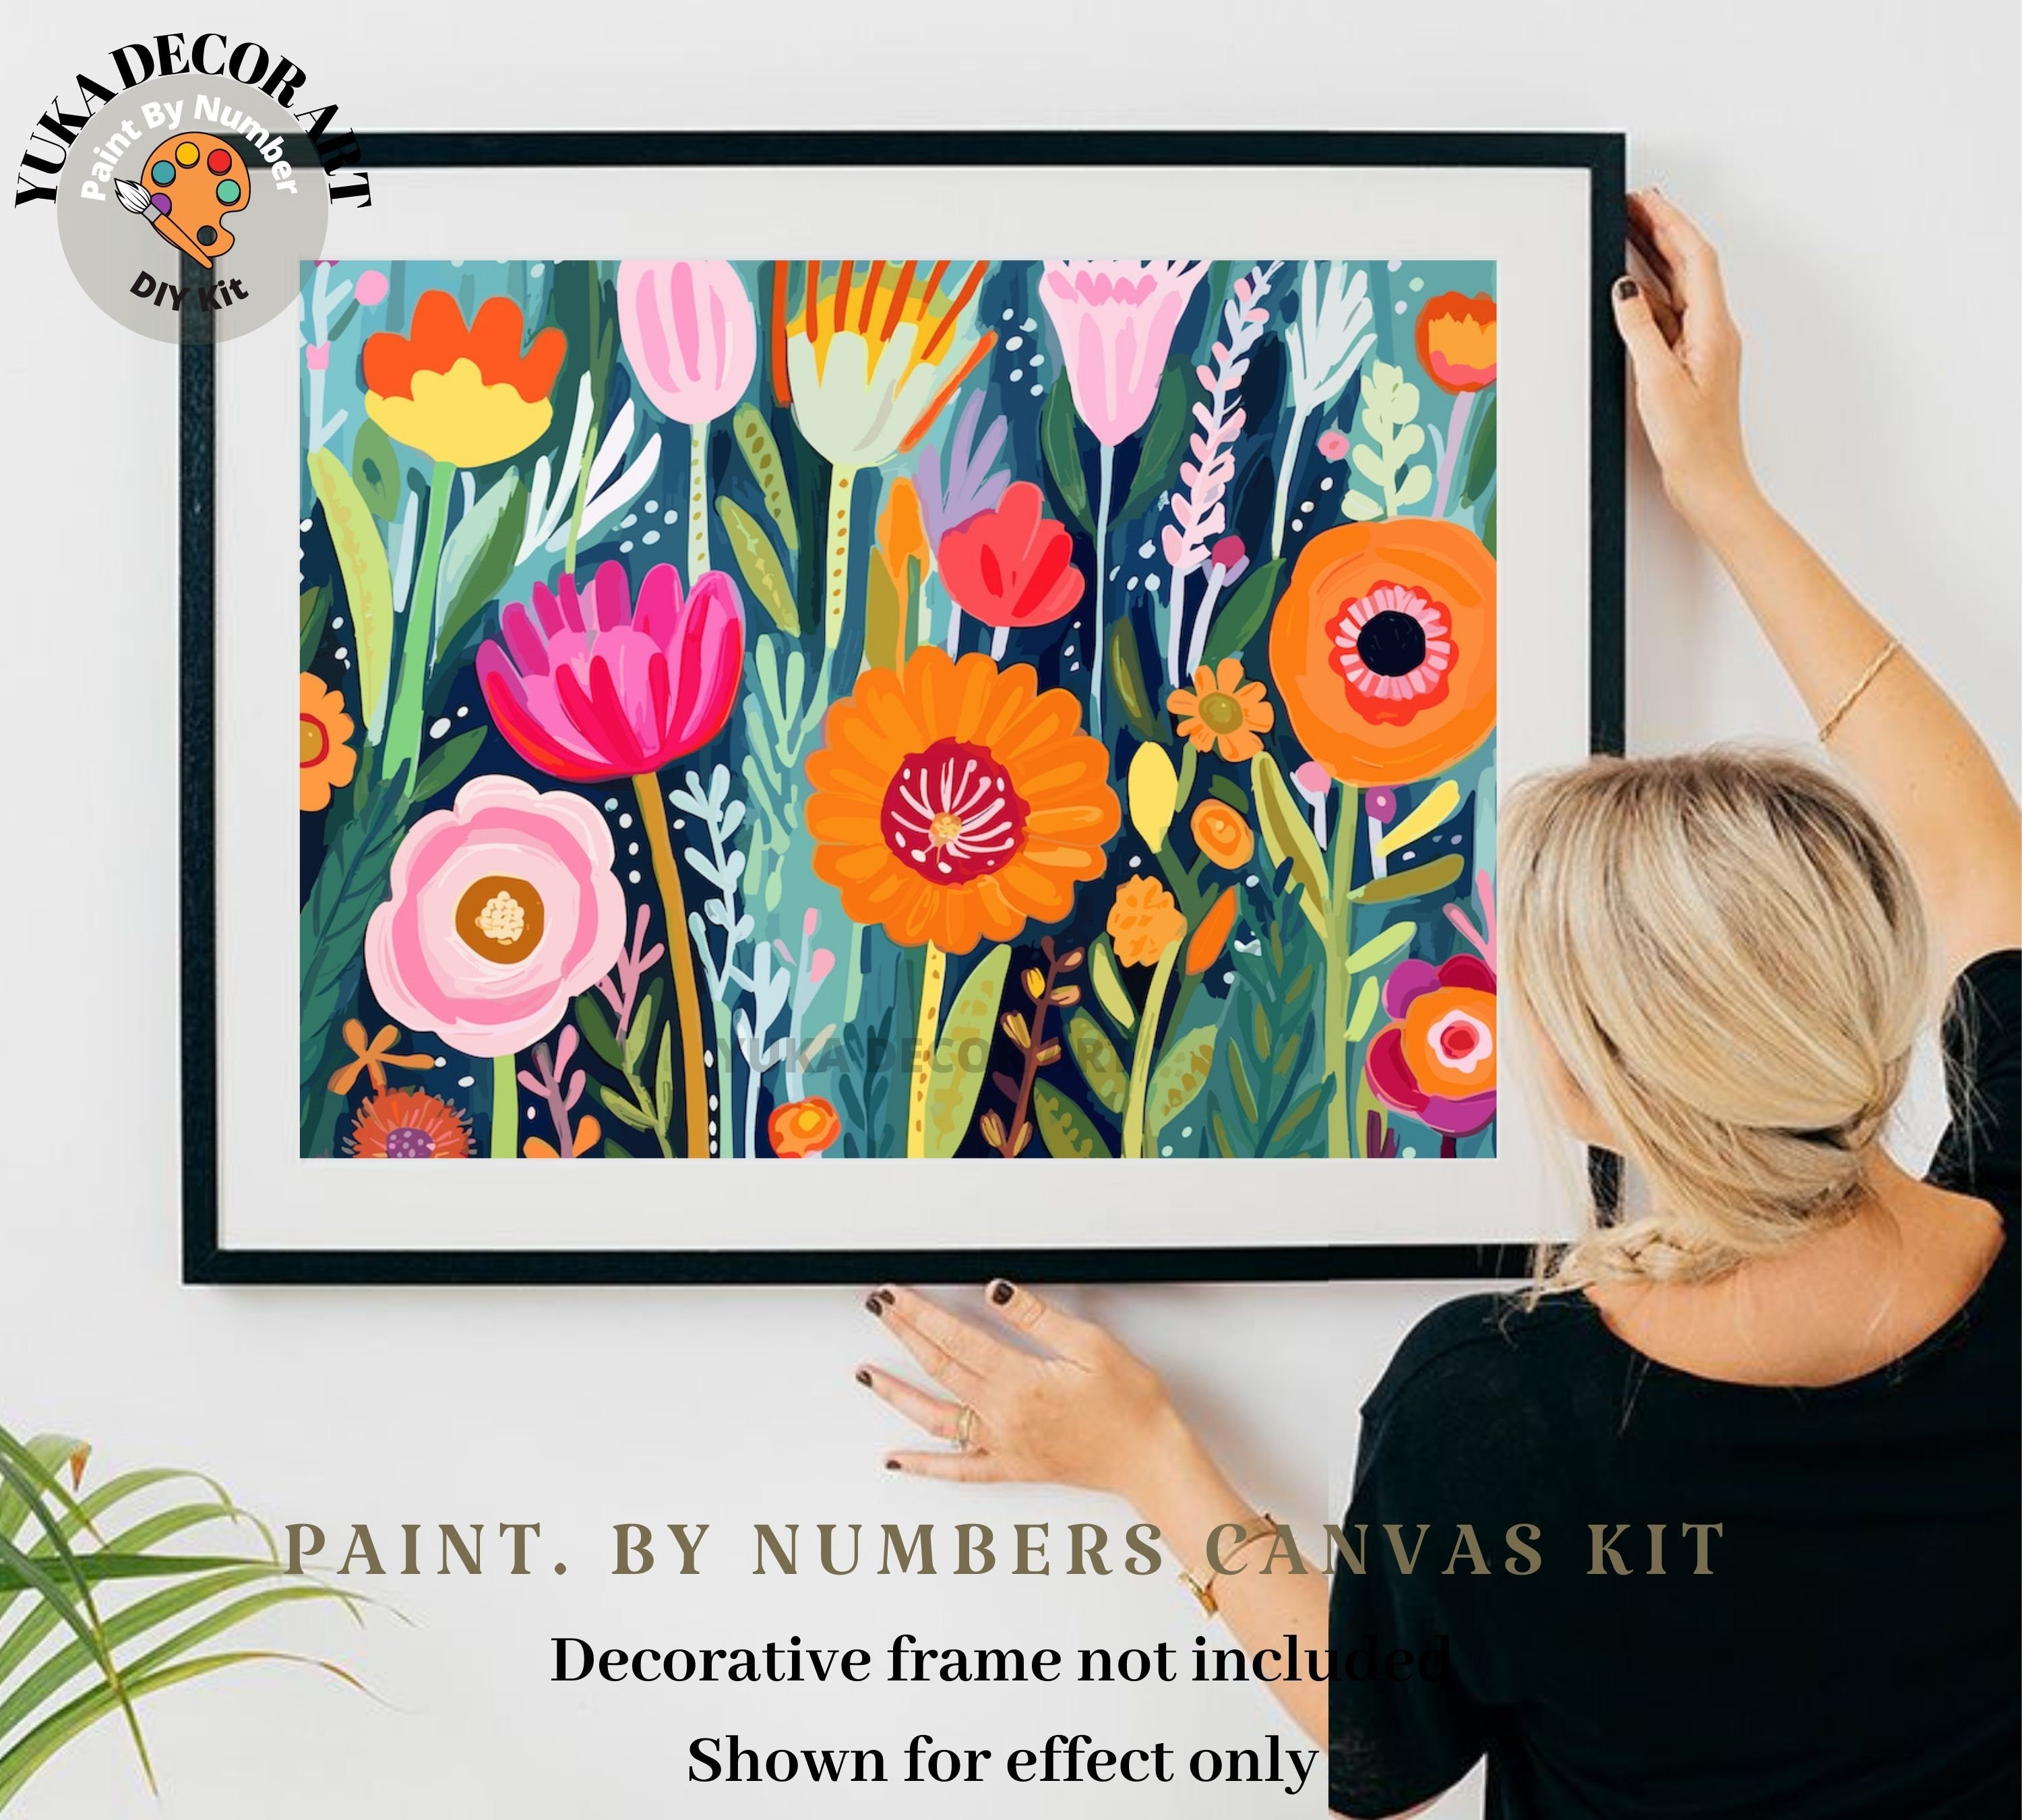 PAINT by NUMBERS DIY Kit for Adults Free Spirit Woman Portrait Vibrant Easy  Beginners Painting Kit Boho Art Gift Dorm Decor code: WO2309103 